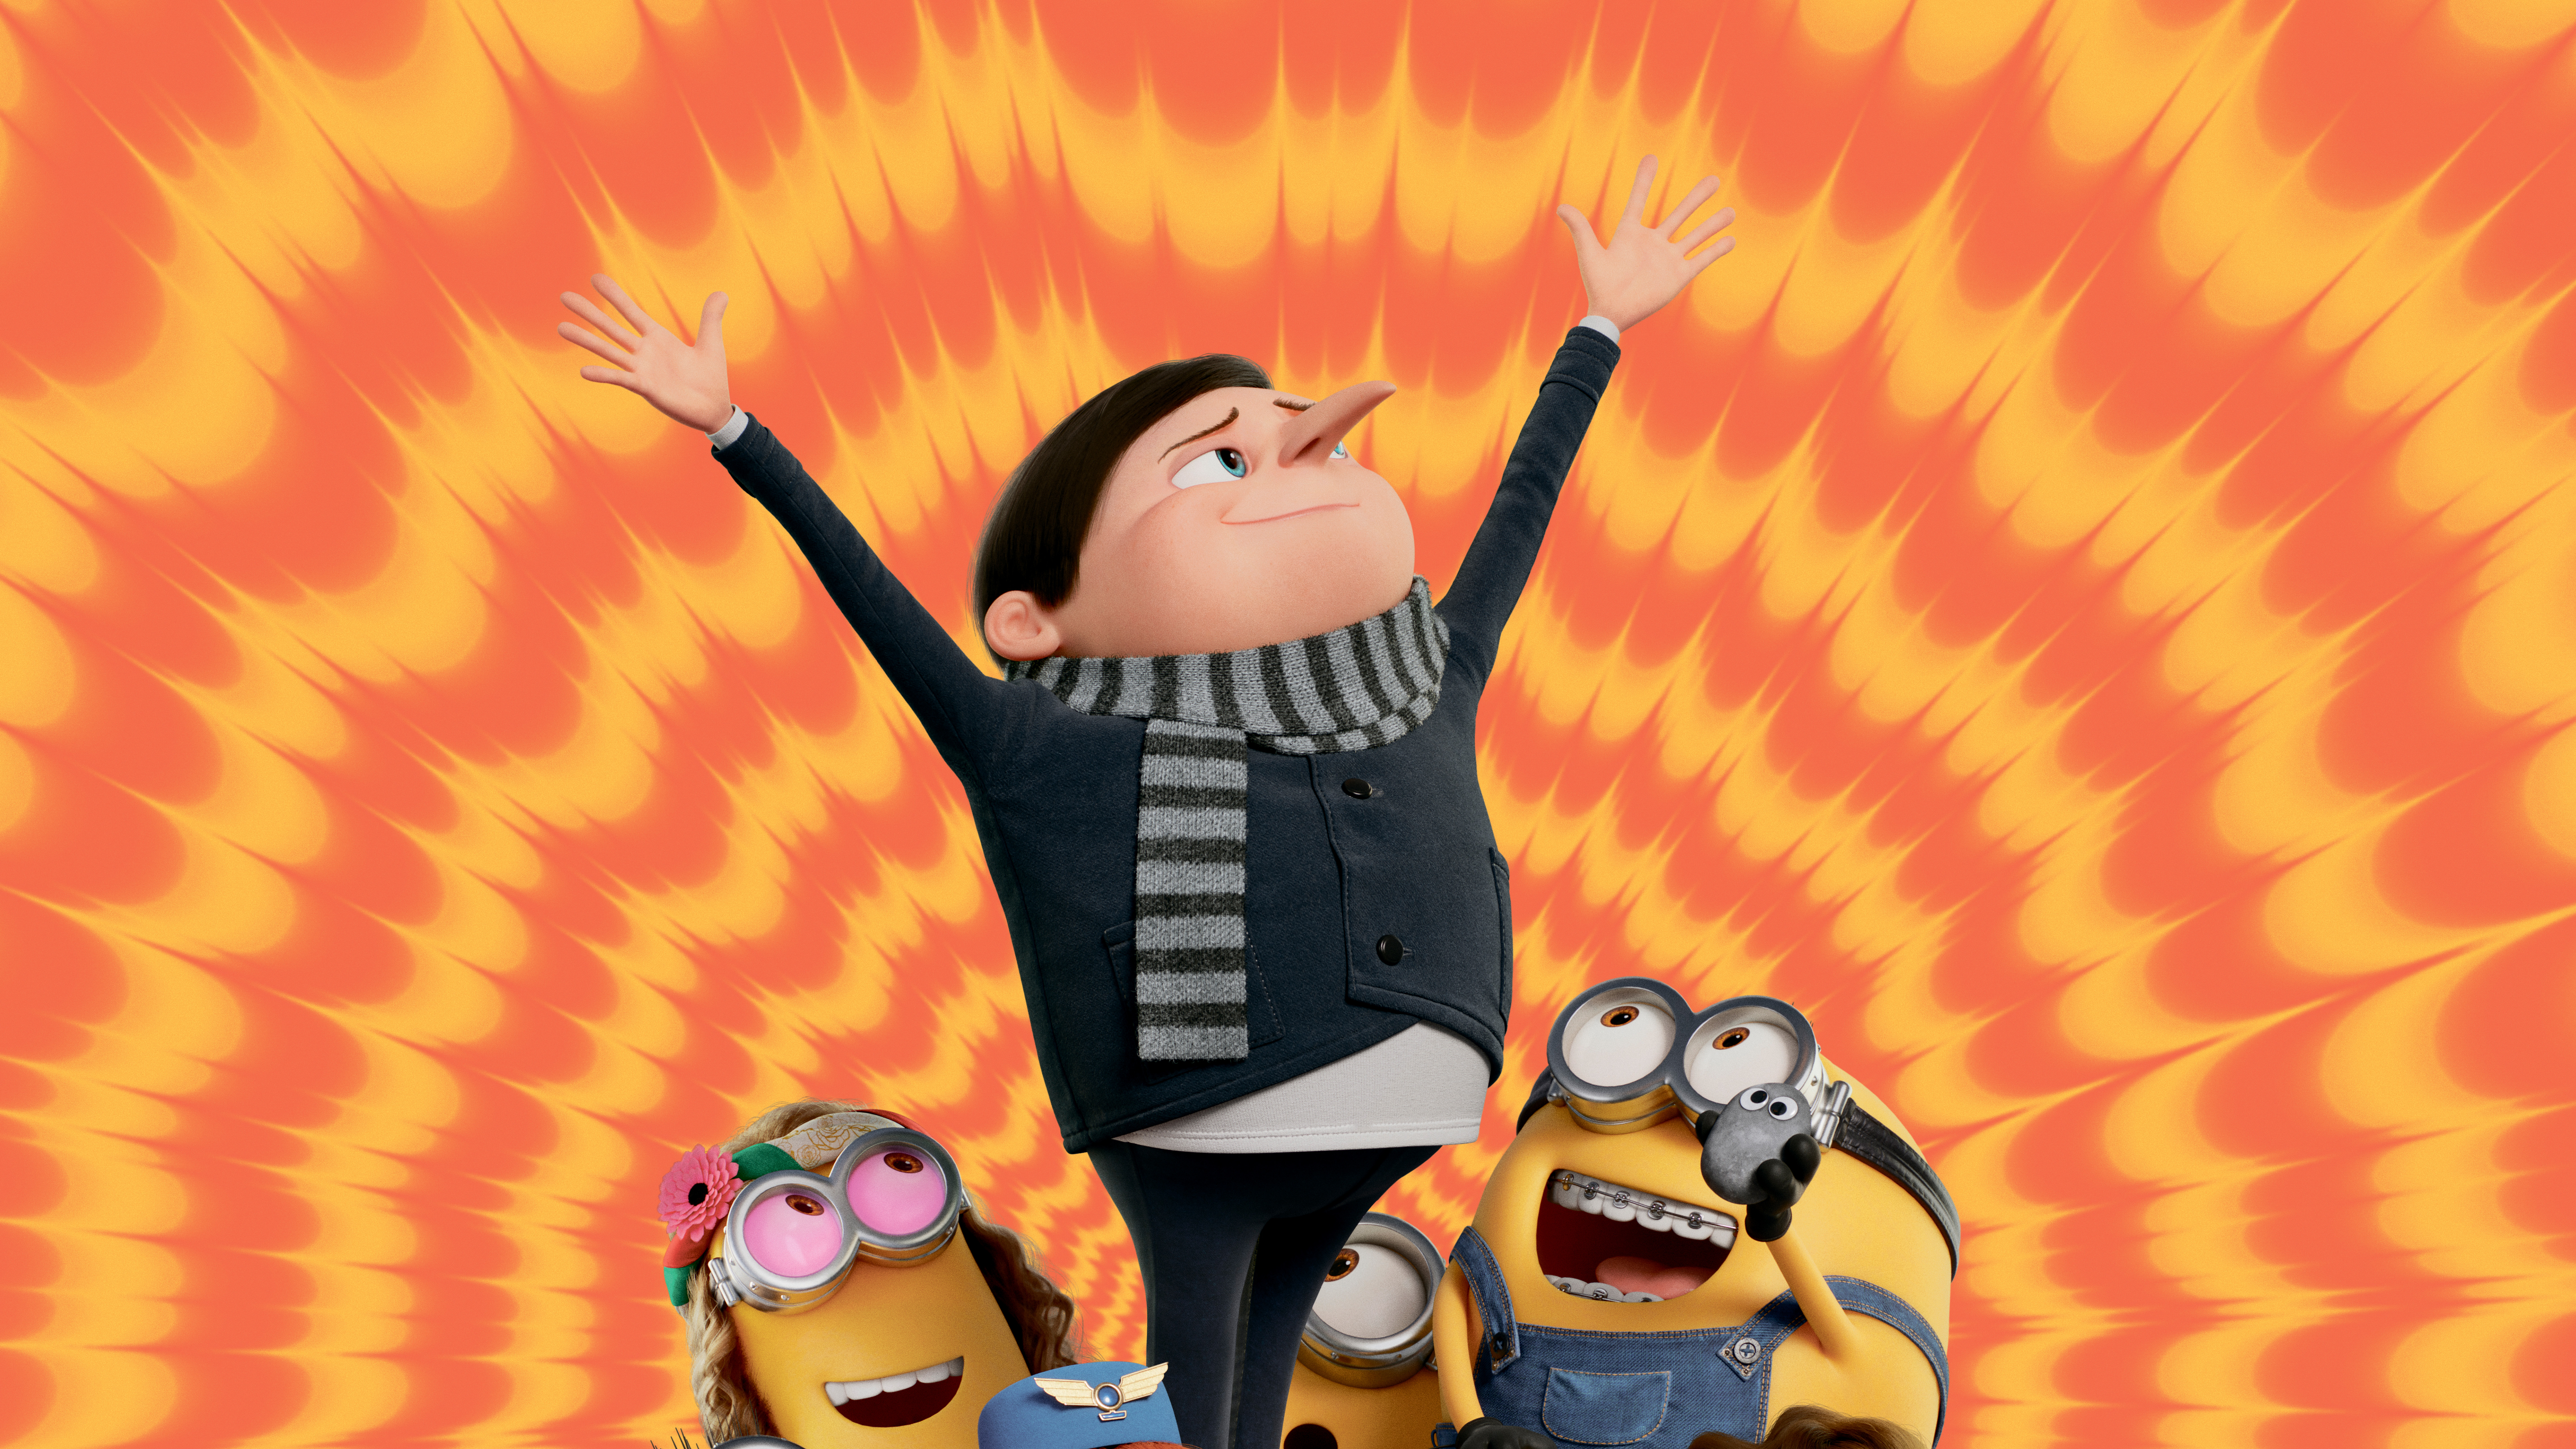 Minions: The Rise of Gru Wallpaper 4K, 2022 Movies, Animation, Movies, #8482